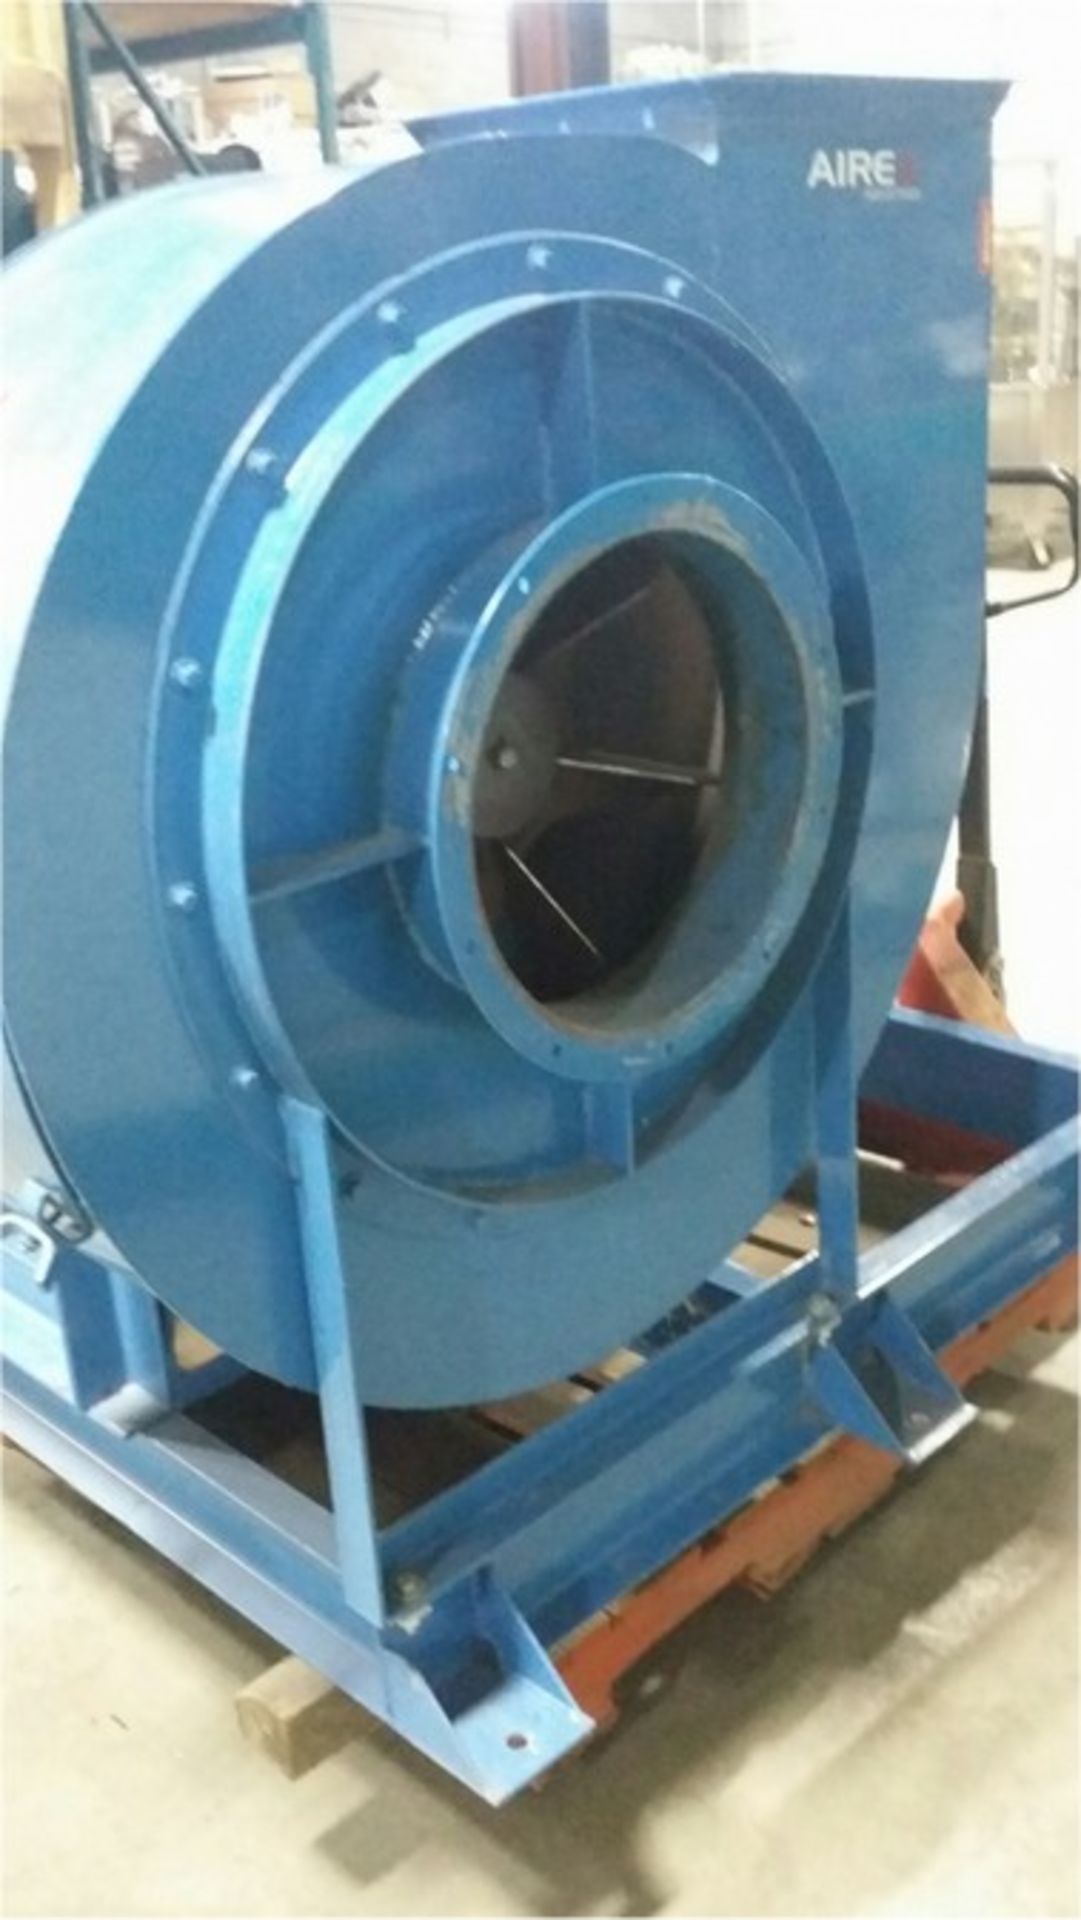 AIREX Model RXI 17LS CL4 Radial Wheel Industrial Blower, Spec: 600 volts, 3 phase, 19,7 amps, 25hp( - Image 3 of 3